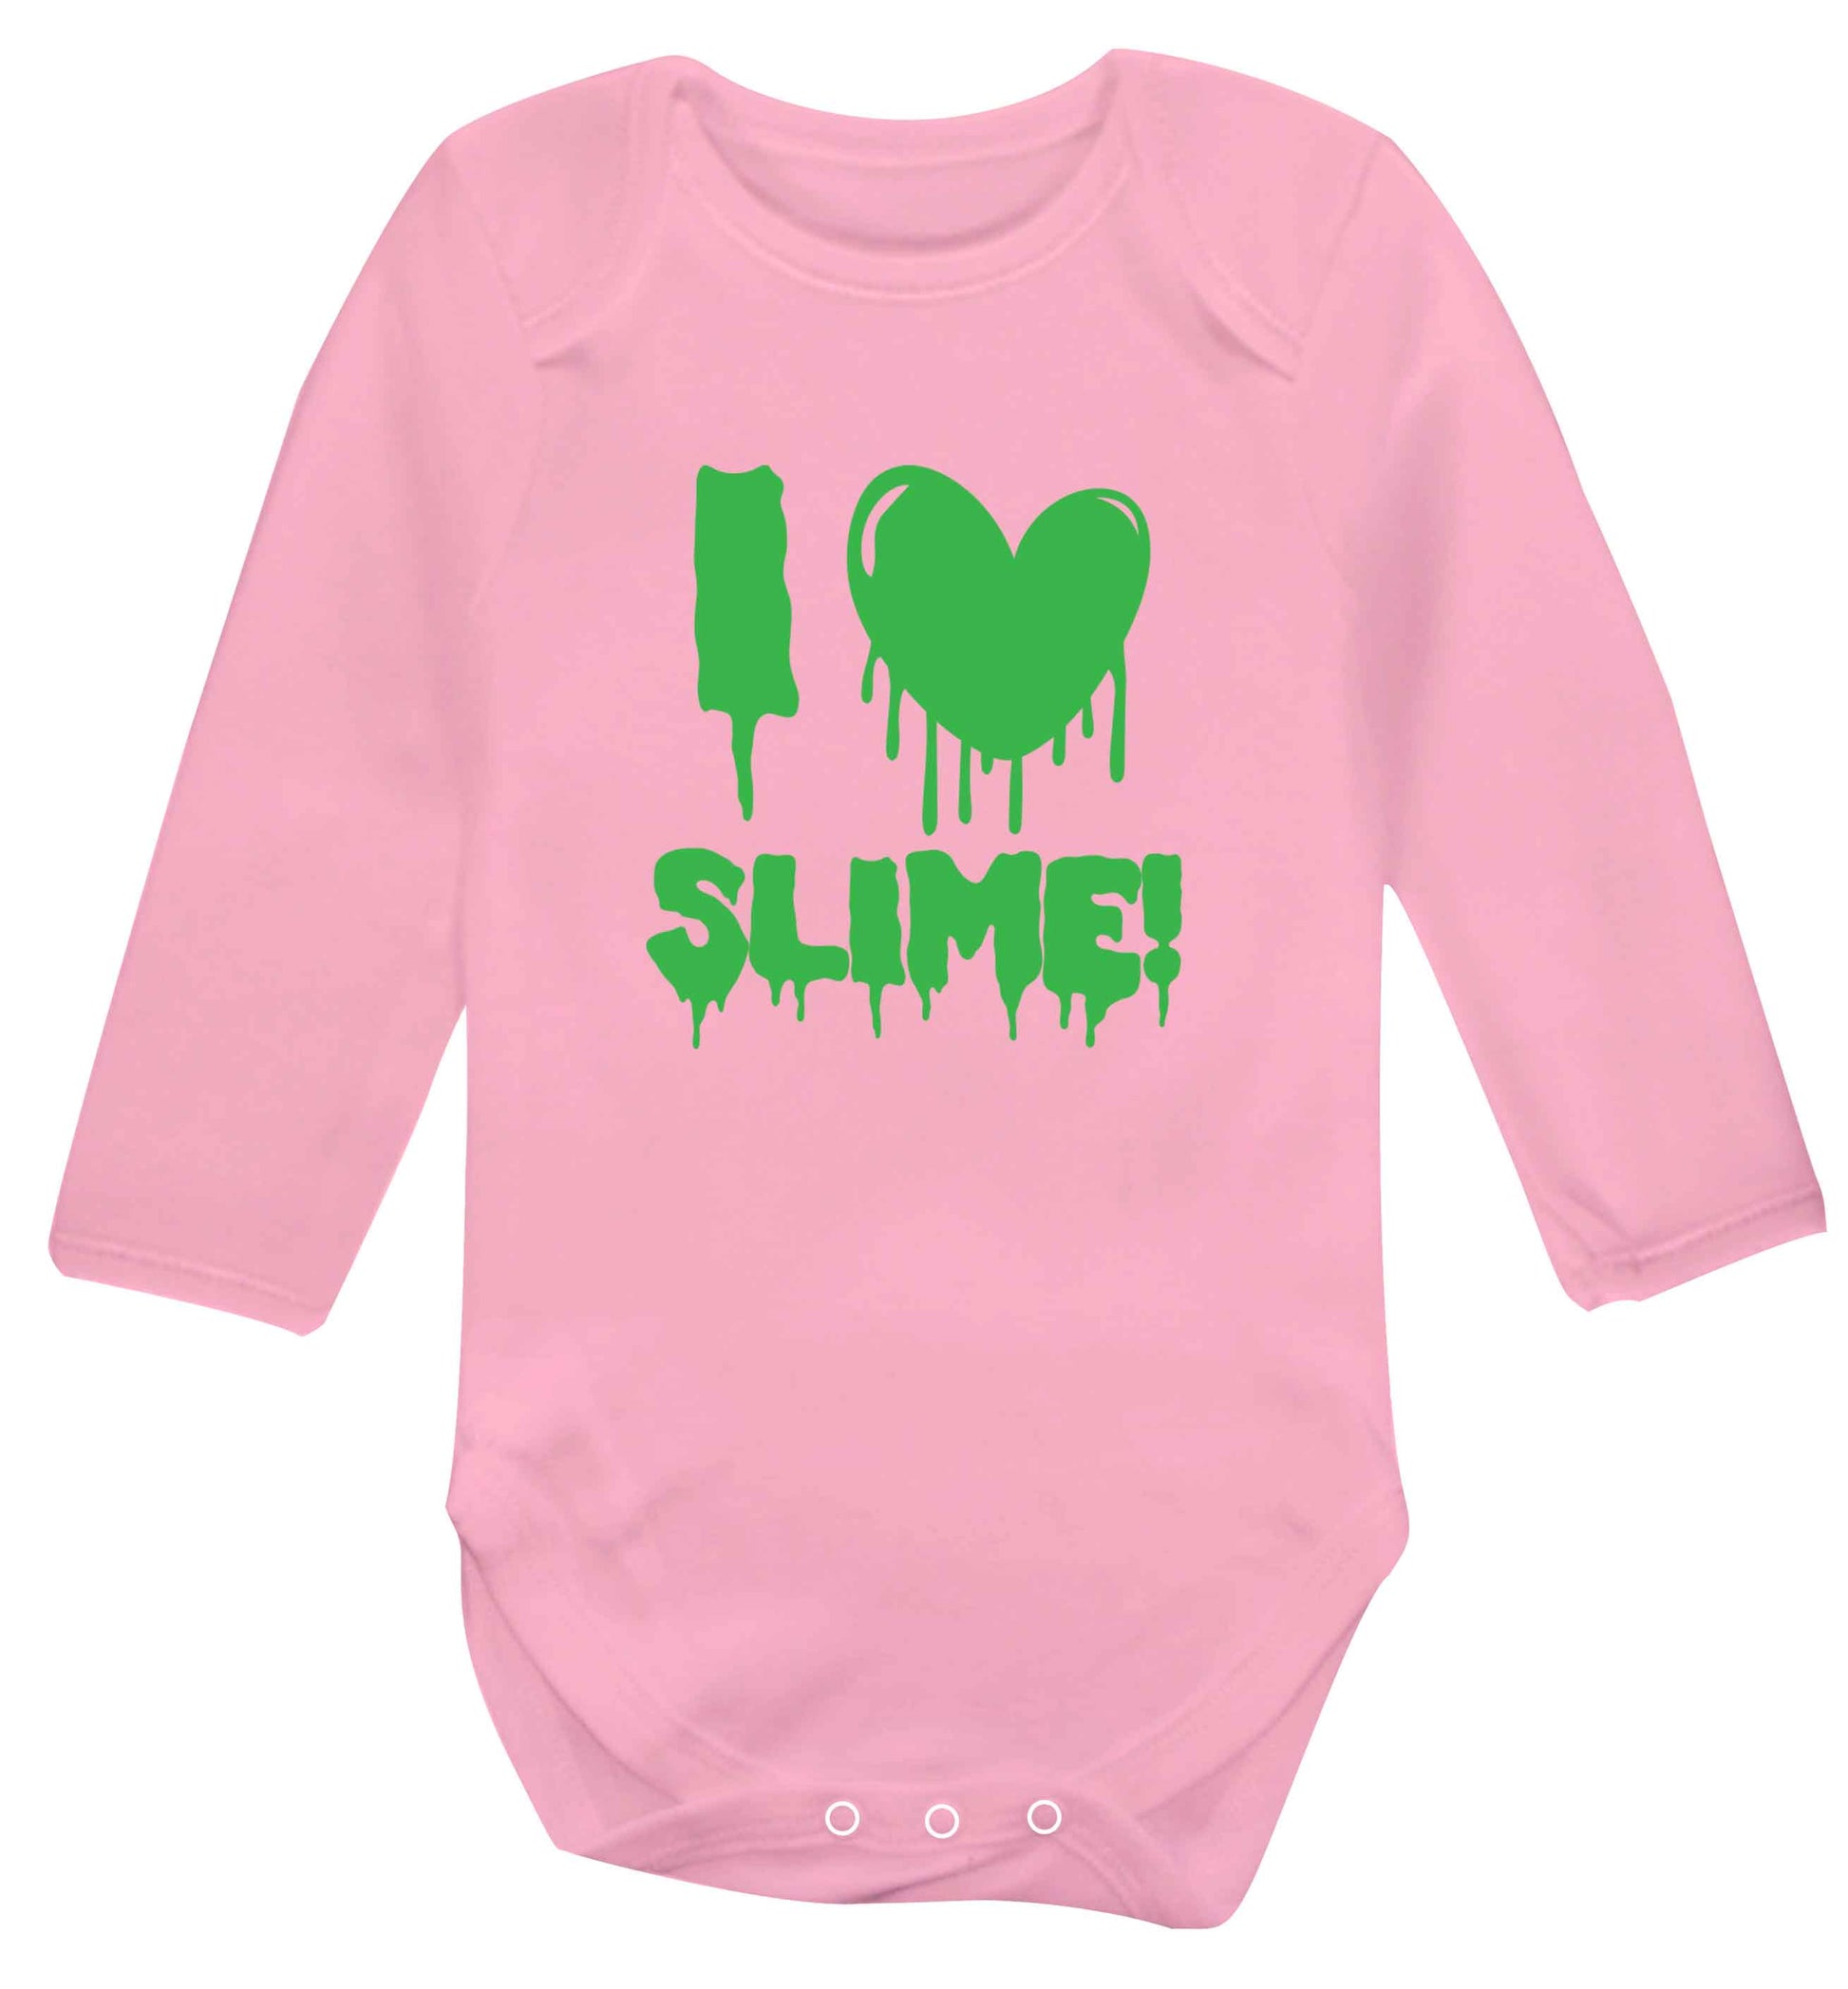 Neon green I love slime baby vest long sleeved pale pink 6-12 months